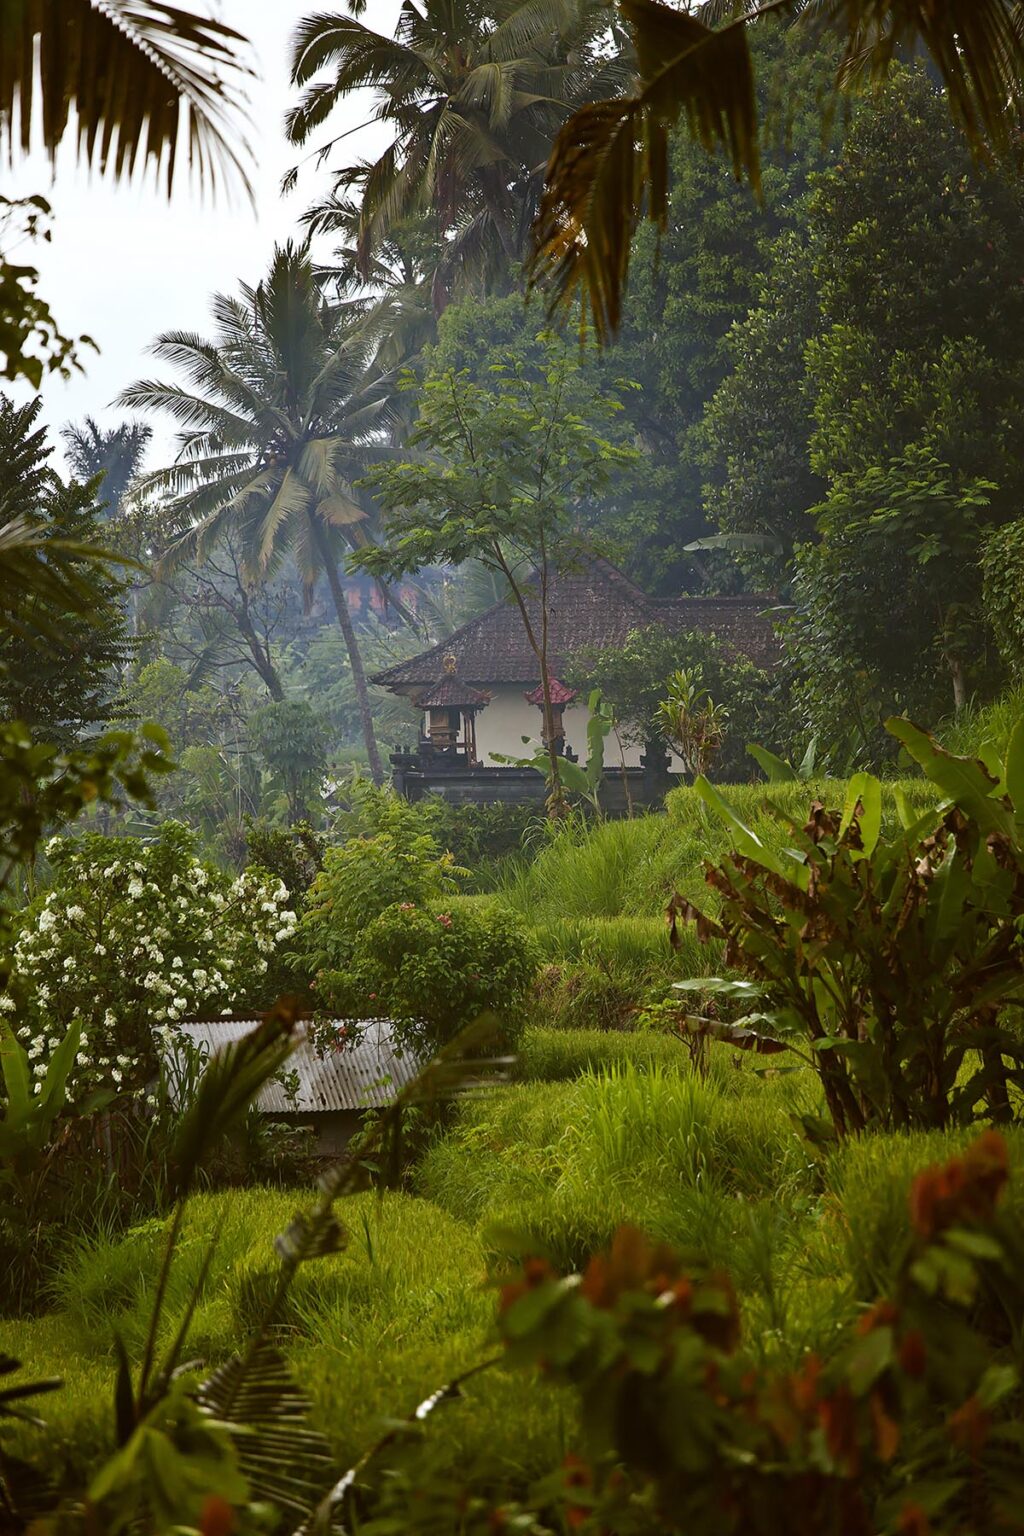 RICE TERRACES and COCONUT PALMS in an agricultural village along the SIDEMAN ROAD - BAlI, INDONESIA